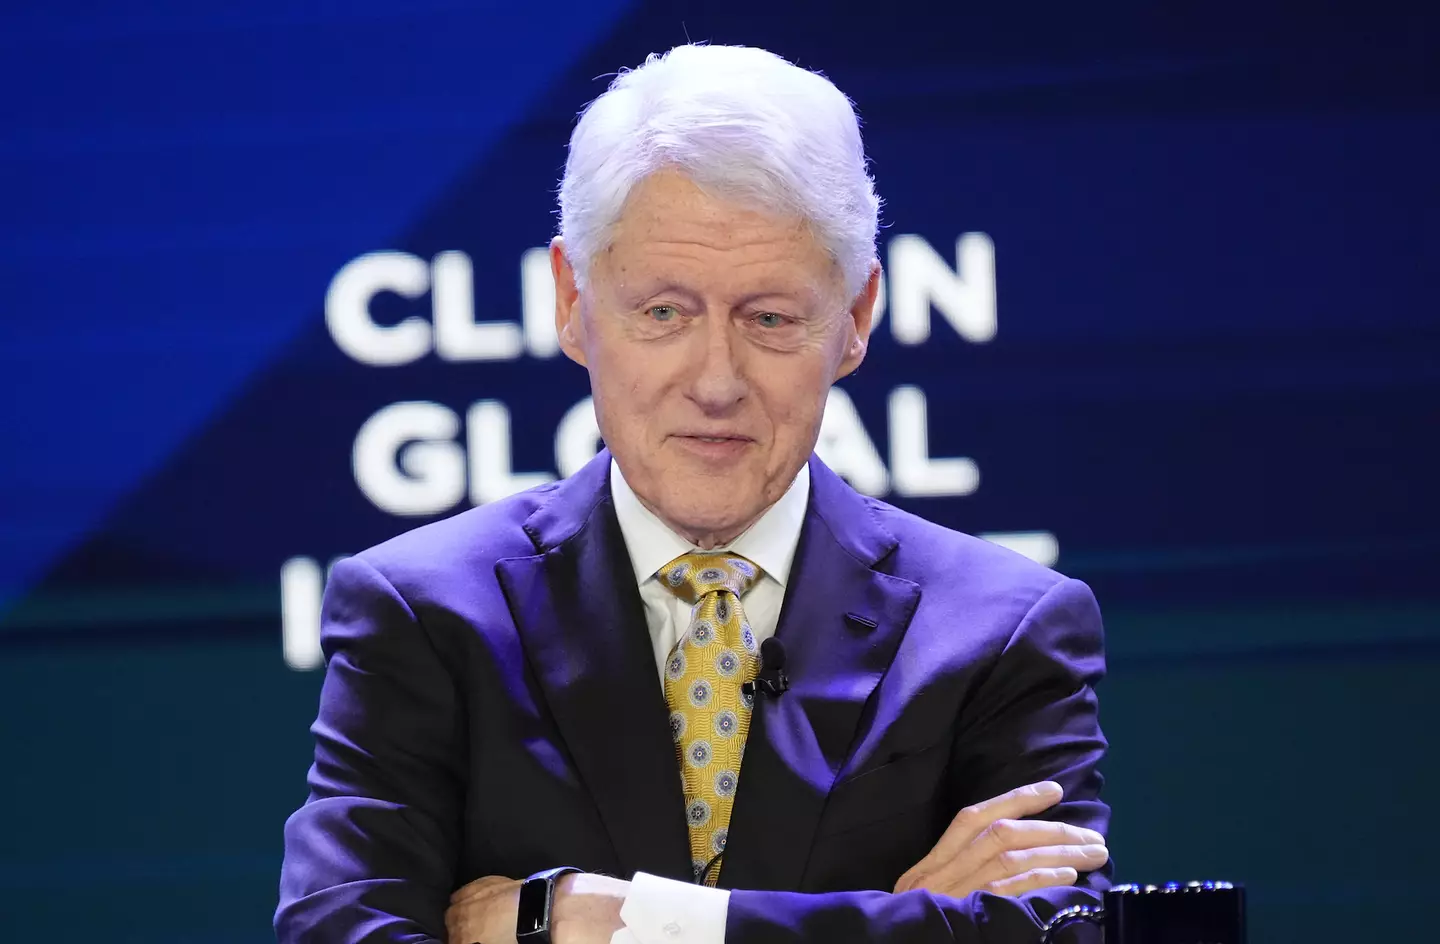 Epstein said Clinton 'likes them young', according to court documents.